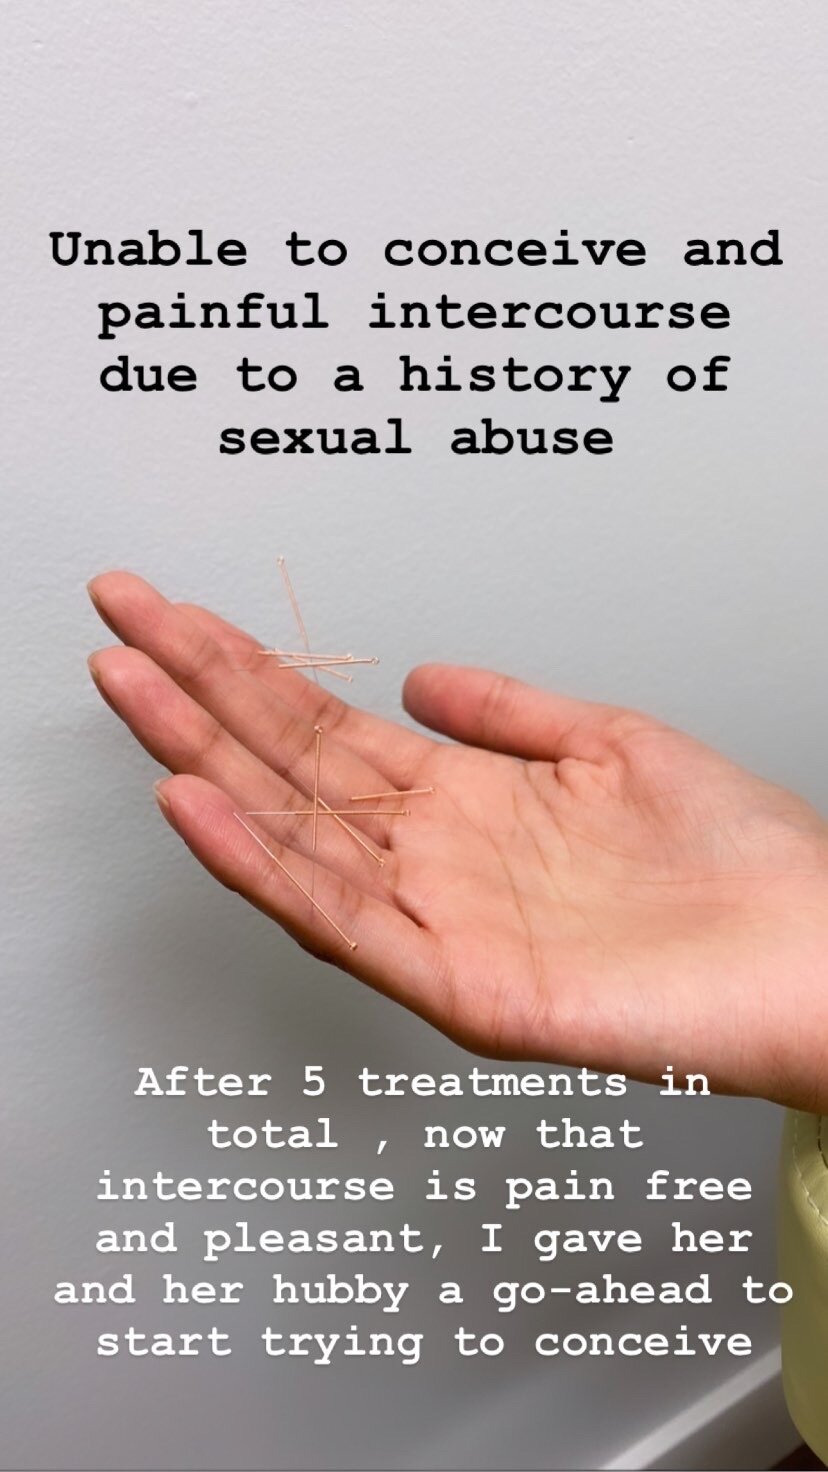  SuJok acupuncture treatment based in Vancouver Canada at Alla Ozerova Acupuncture Clinic used to treat trauma from sexual abuse causing painful intercourse. After 5 treatments, intercourse is pain-free  